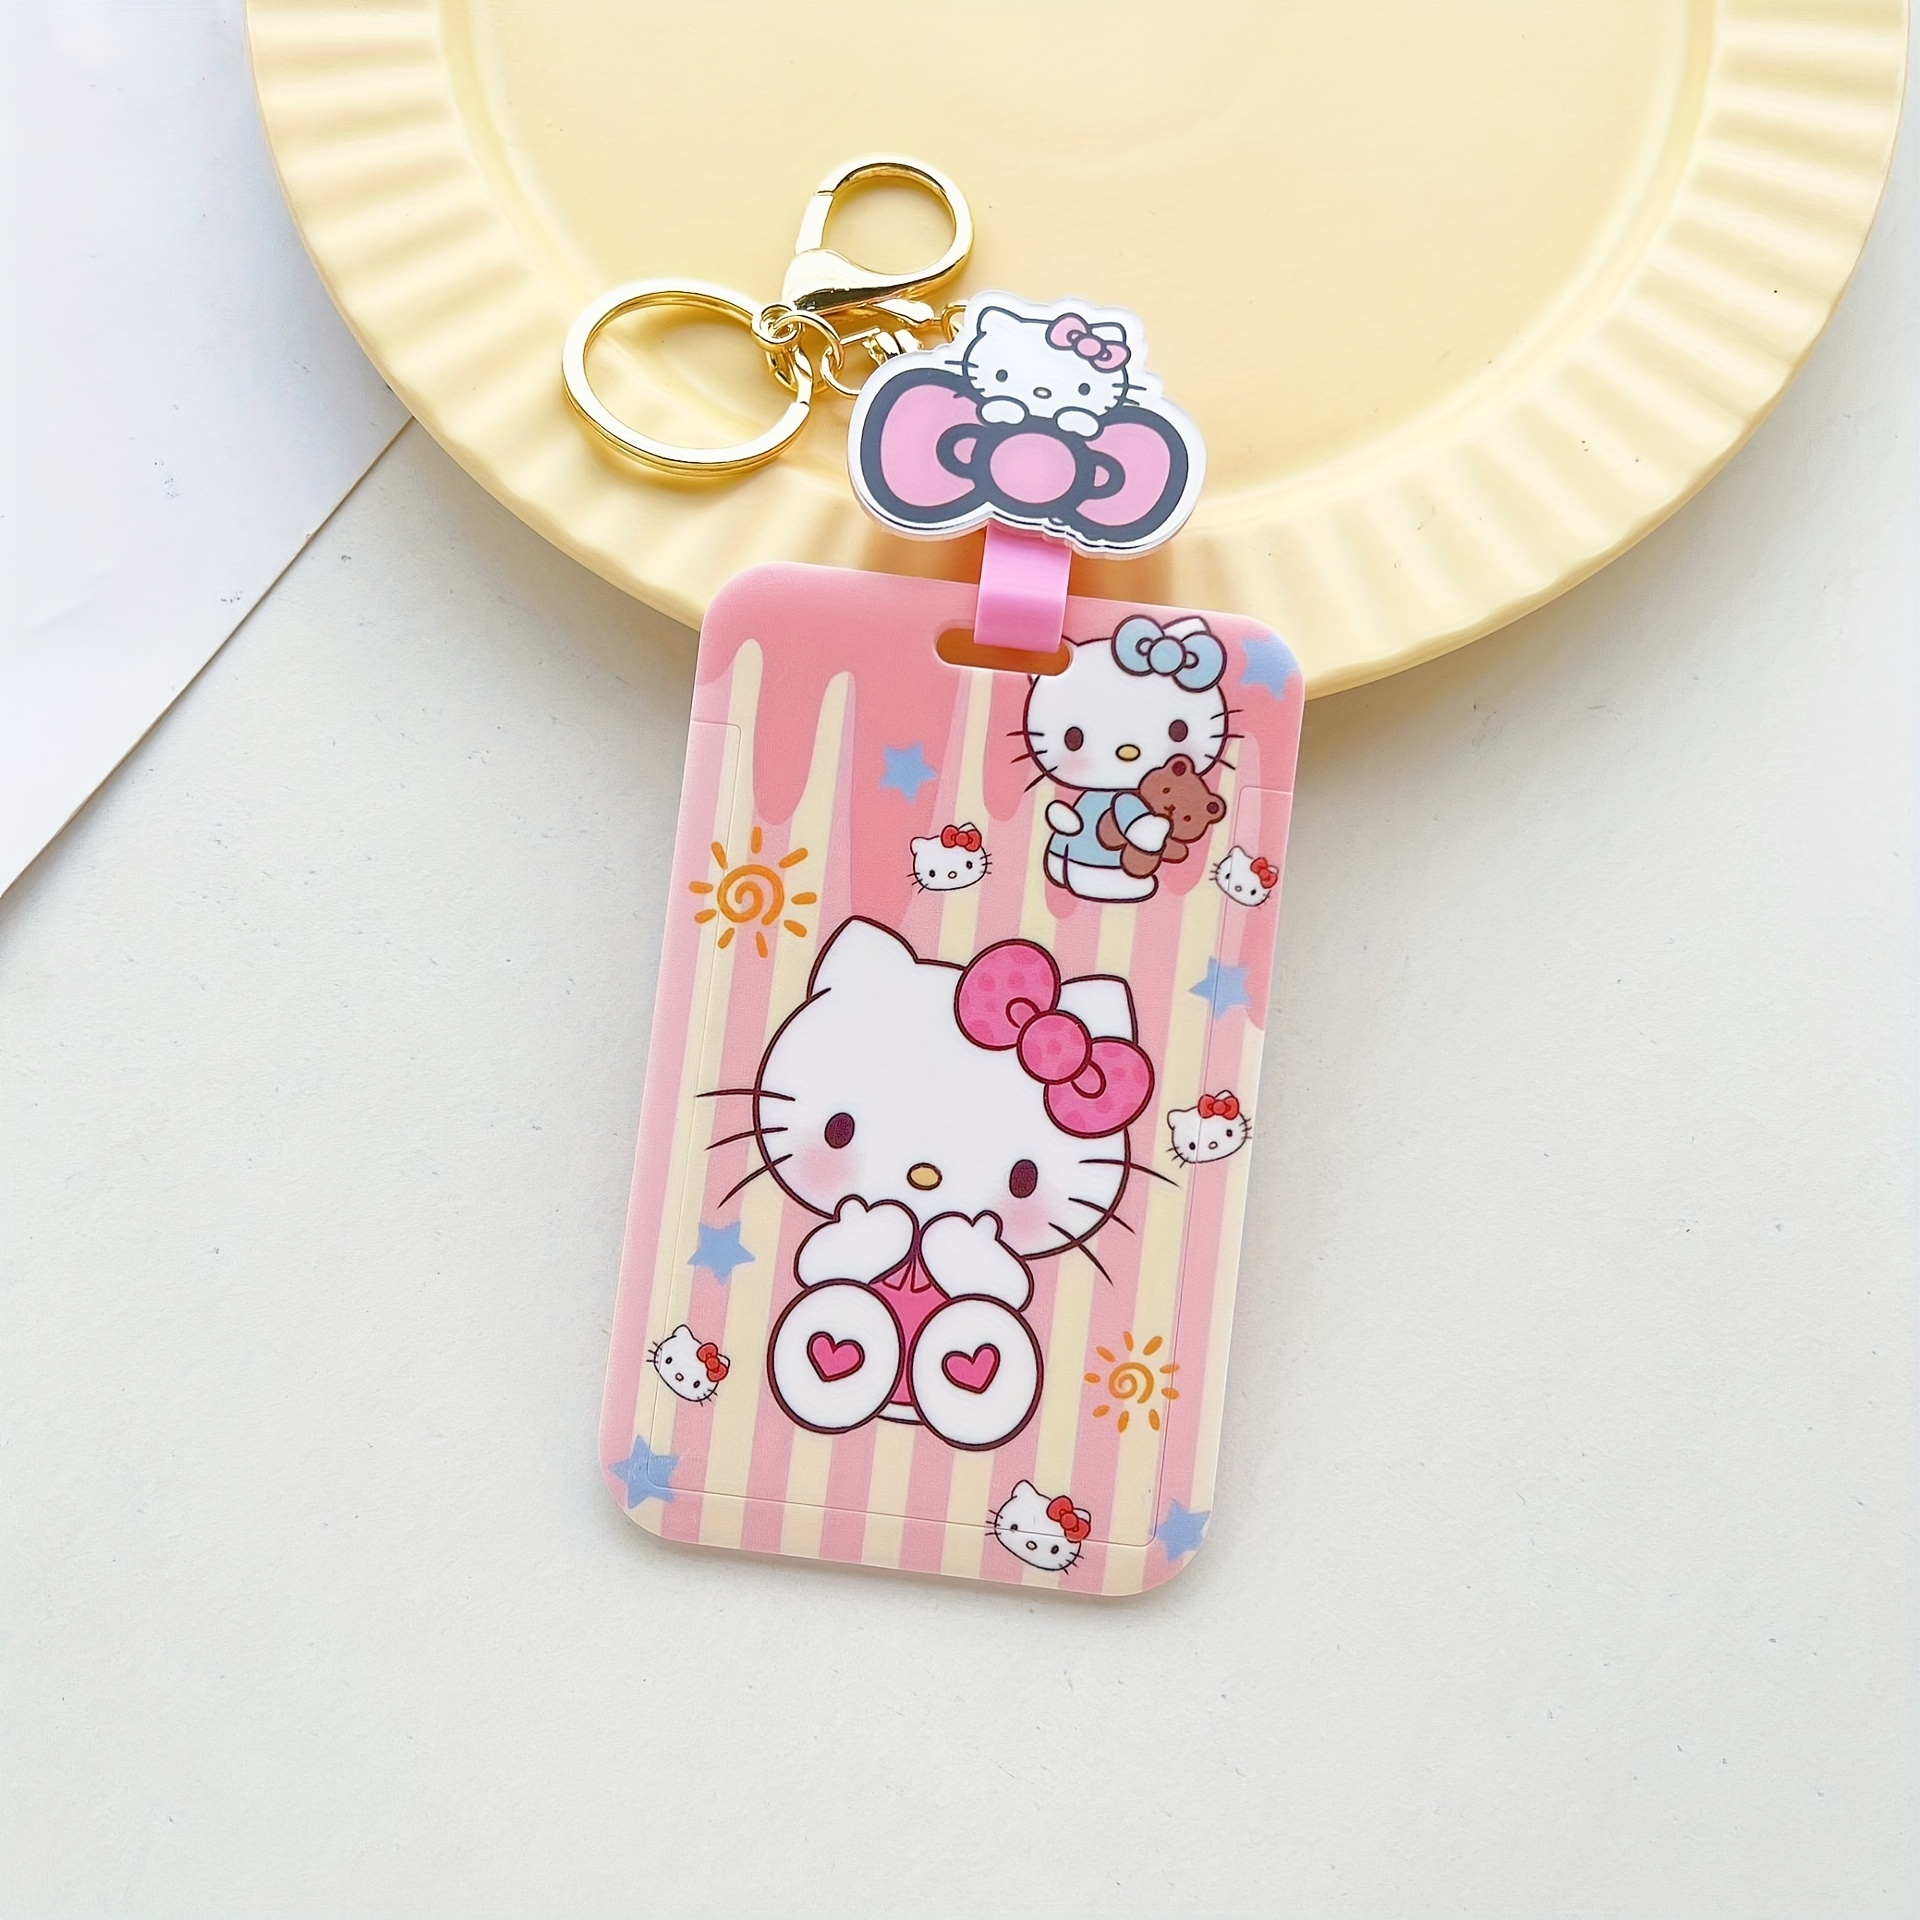 1pc My Melody Pompompurin Pochacco Telescopic ID Badge Holder Keychain Acrylic Badge Reel Name Tag, Cute Retractable ID Card Holder for Office